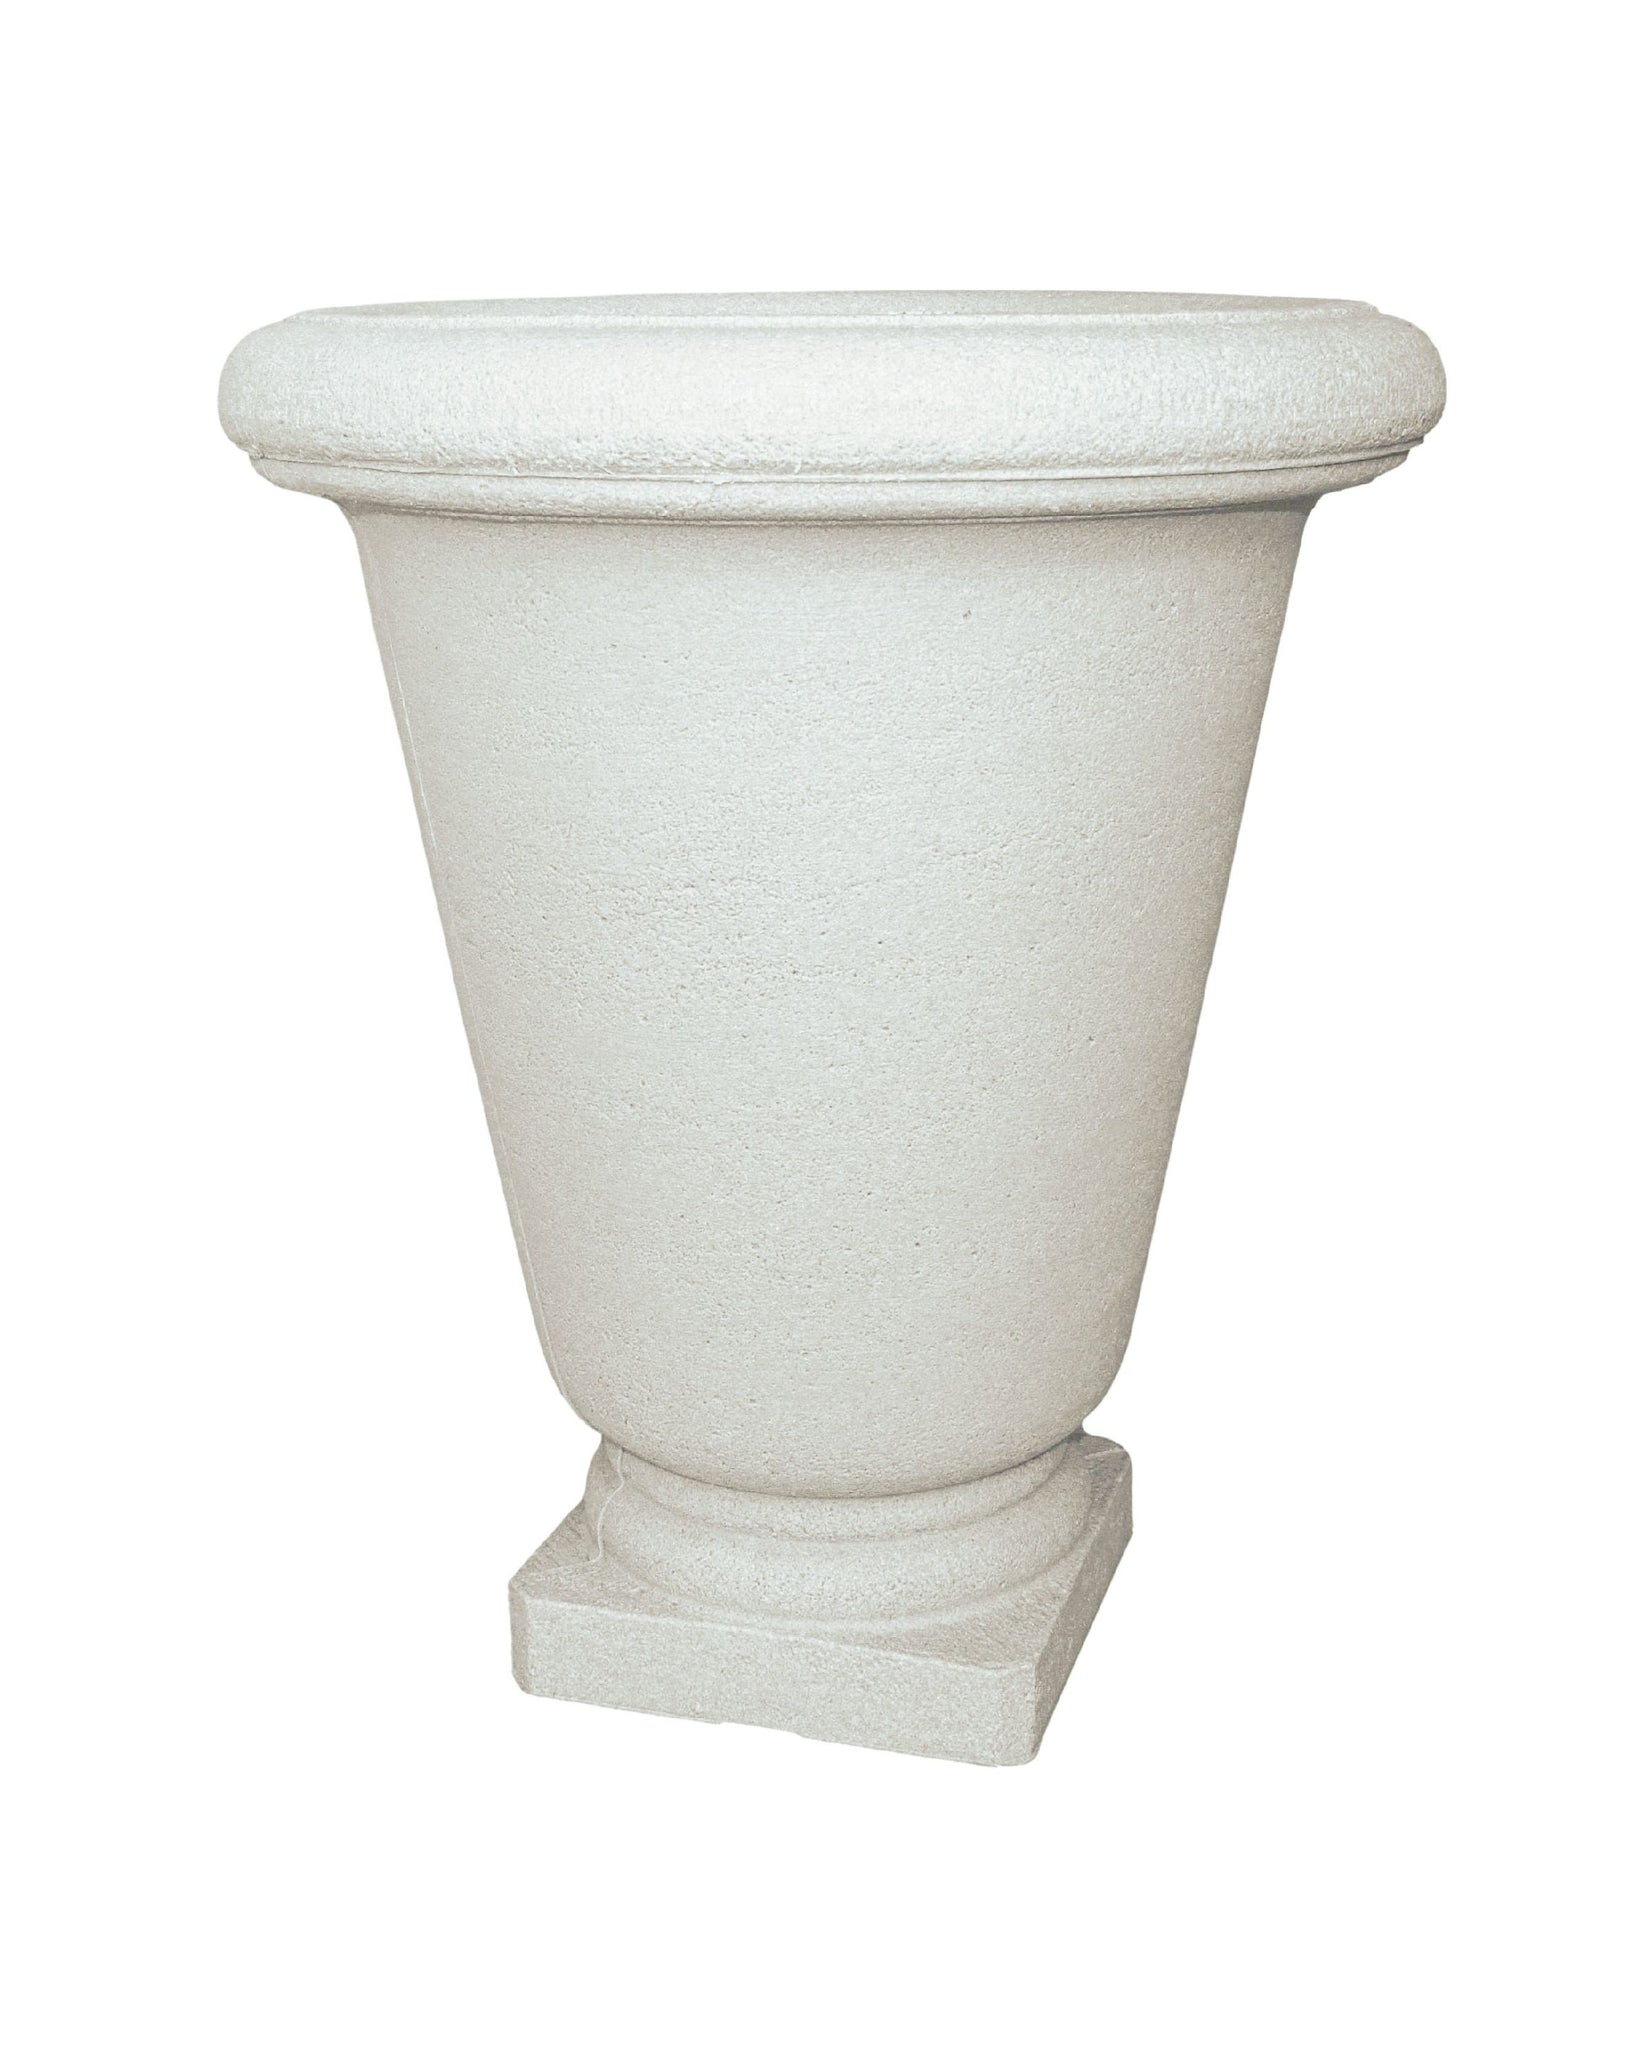 Classic Bell Urn, front view showing great texture in the plant pot similar to that of concrete. Beautiful upside-down bell shape and rounded rim. Natural sandstone colour. Florastyle by Hingham.